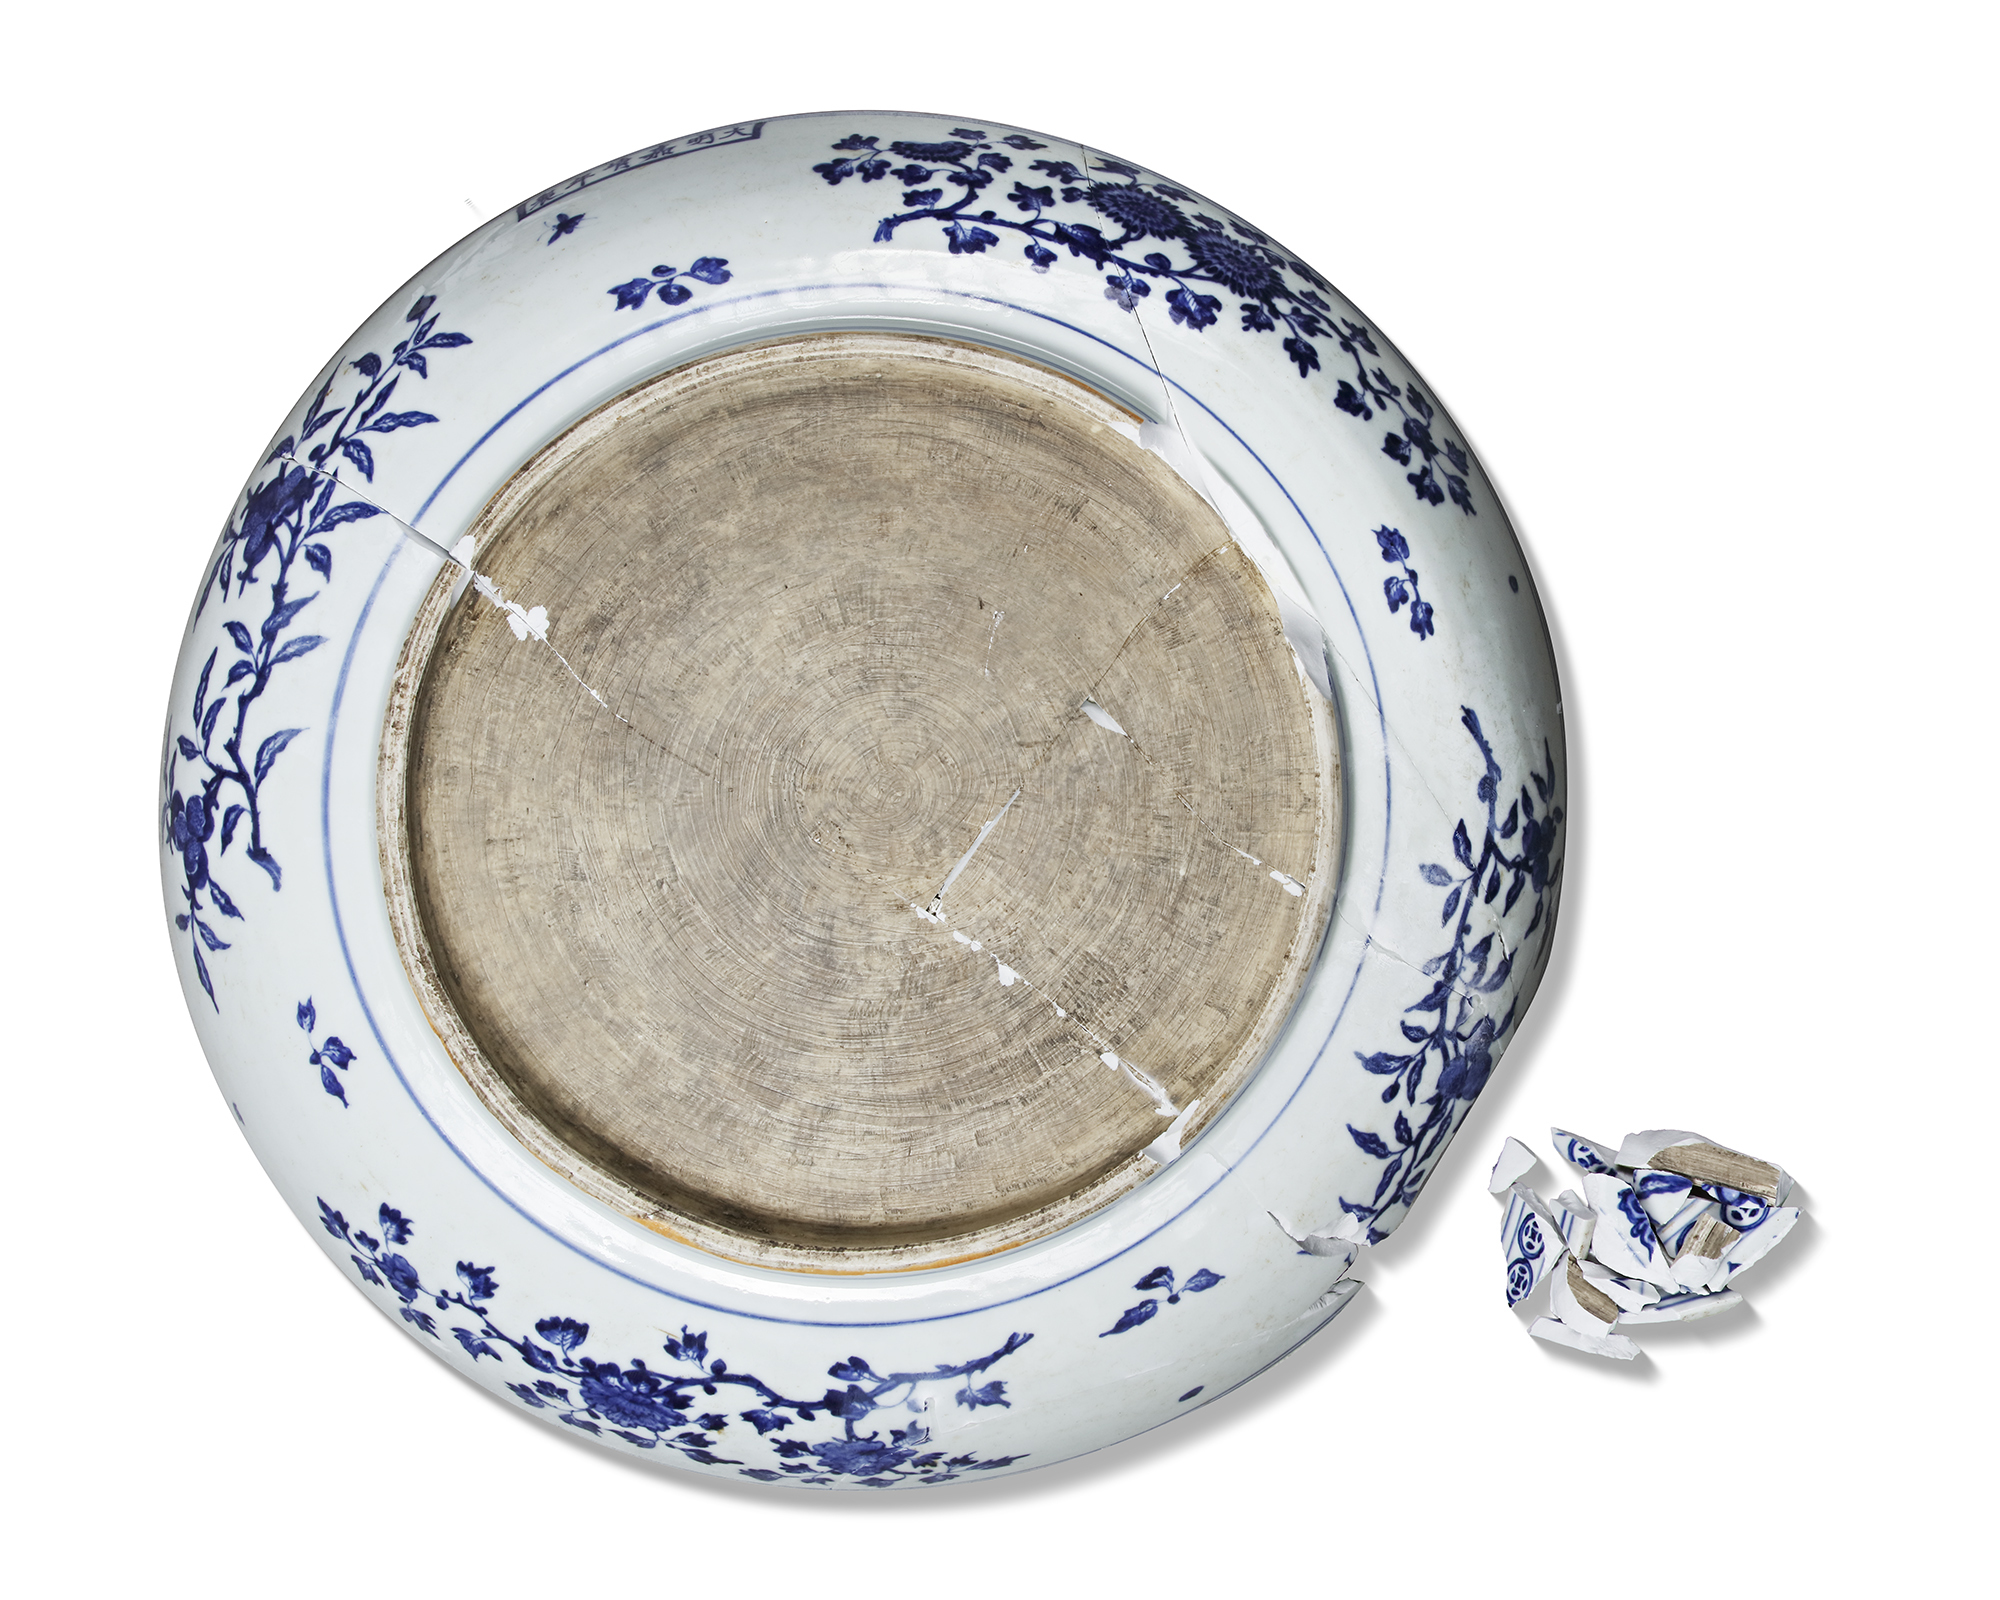 A LARGE CHINESE BLUE AND WHITE CHARGER, MING DYNASTY (1368-1644) OR LATER - Image 2 of 3